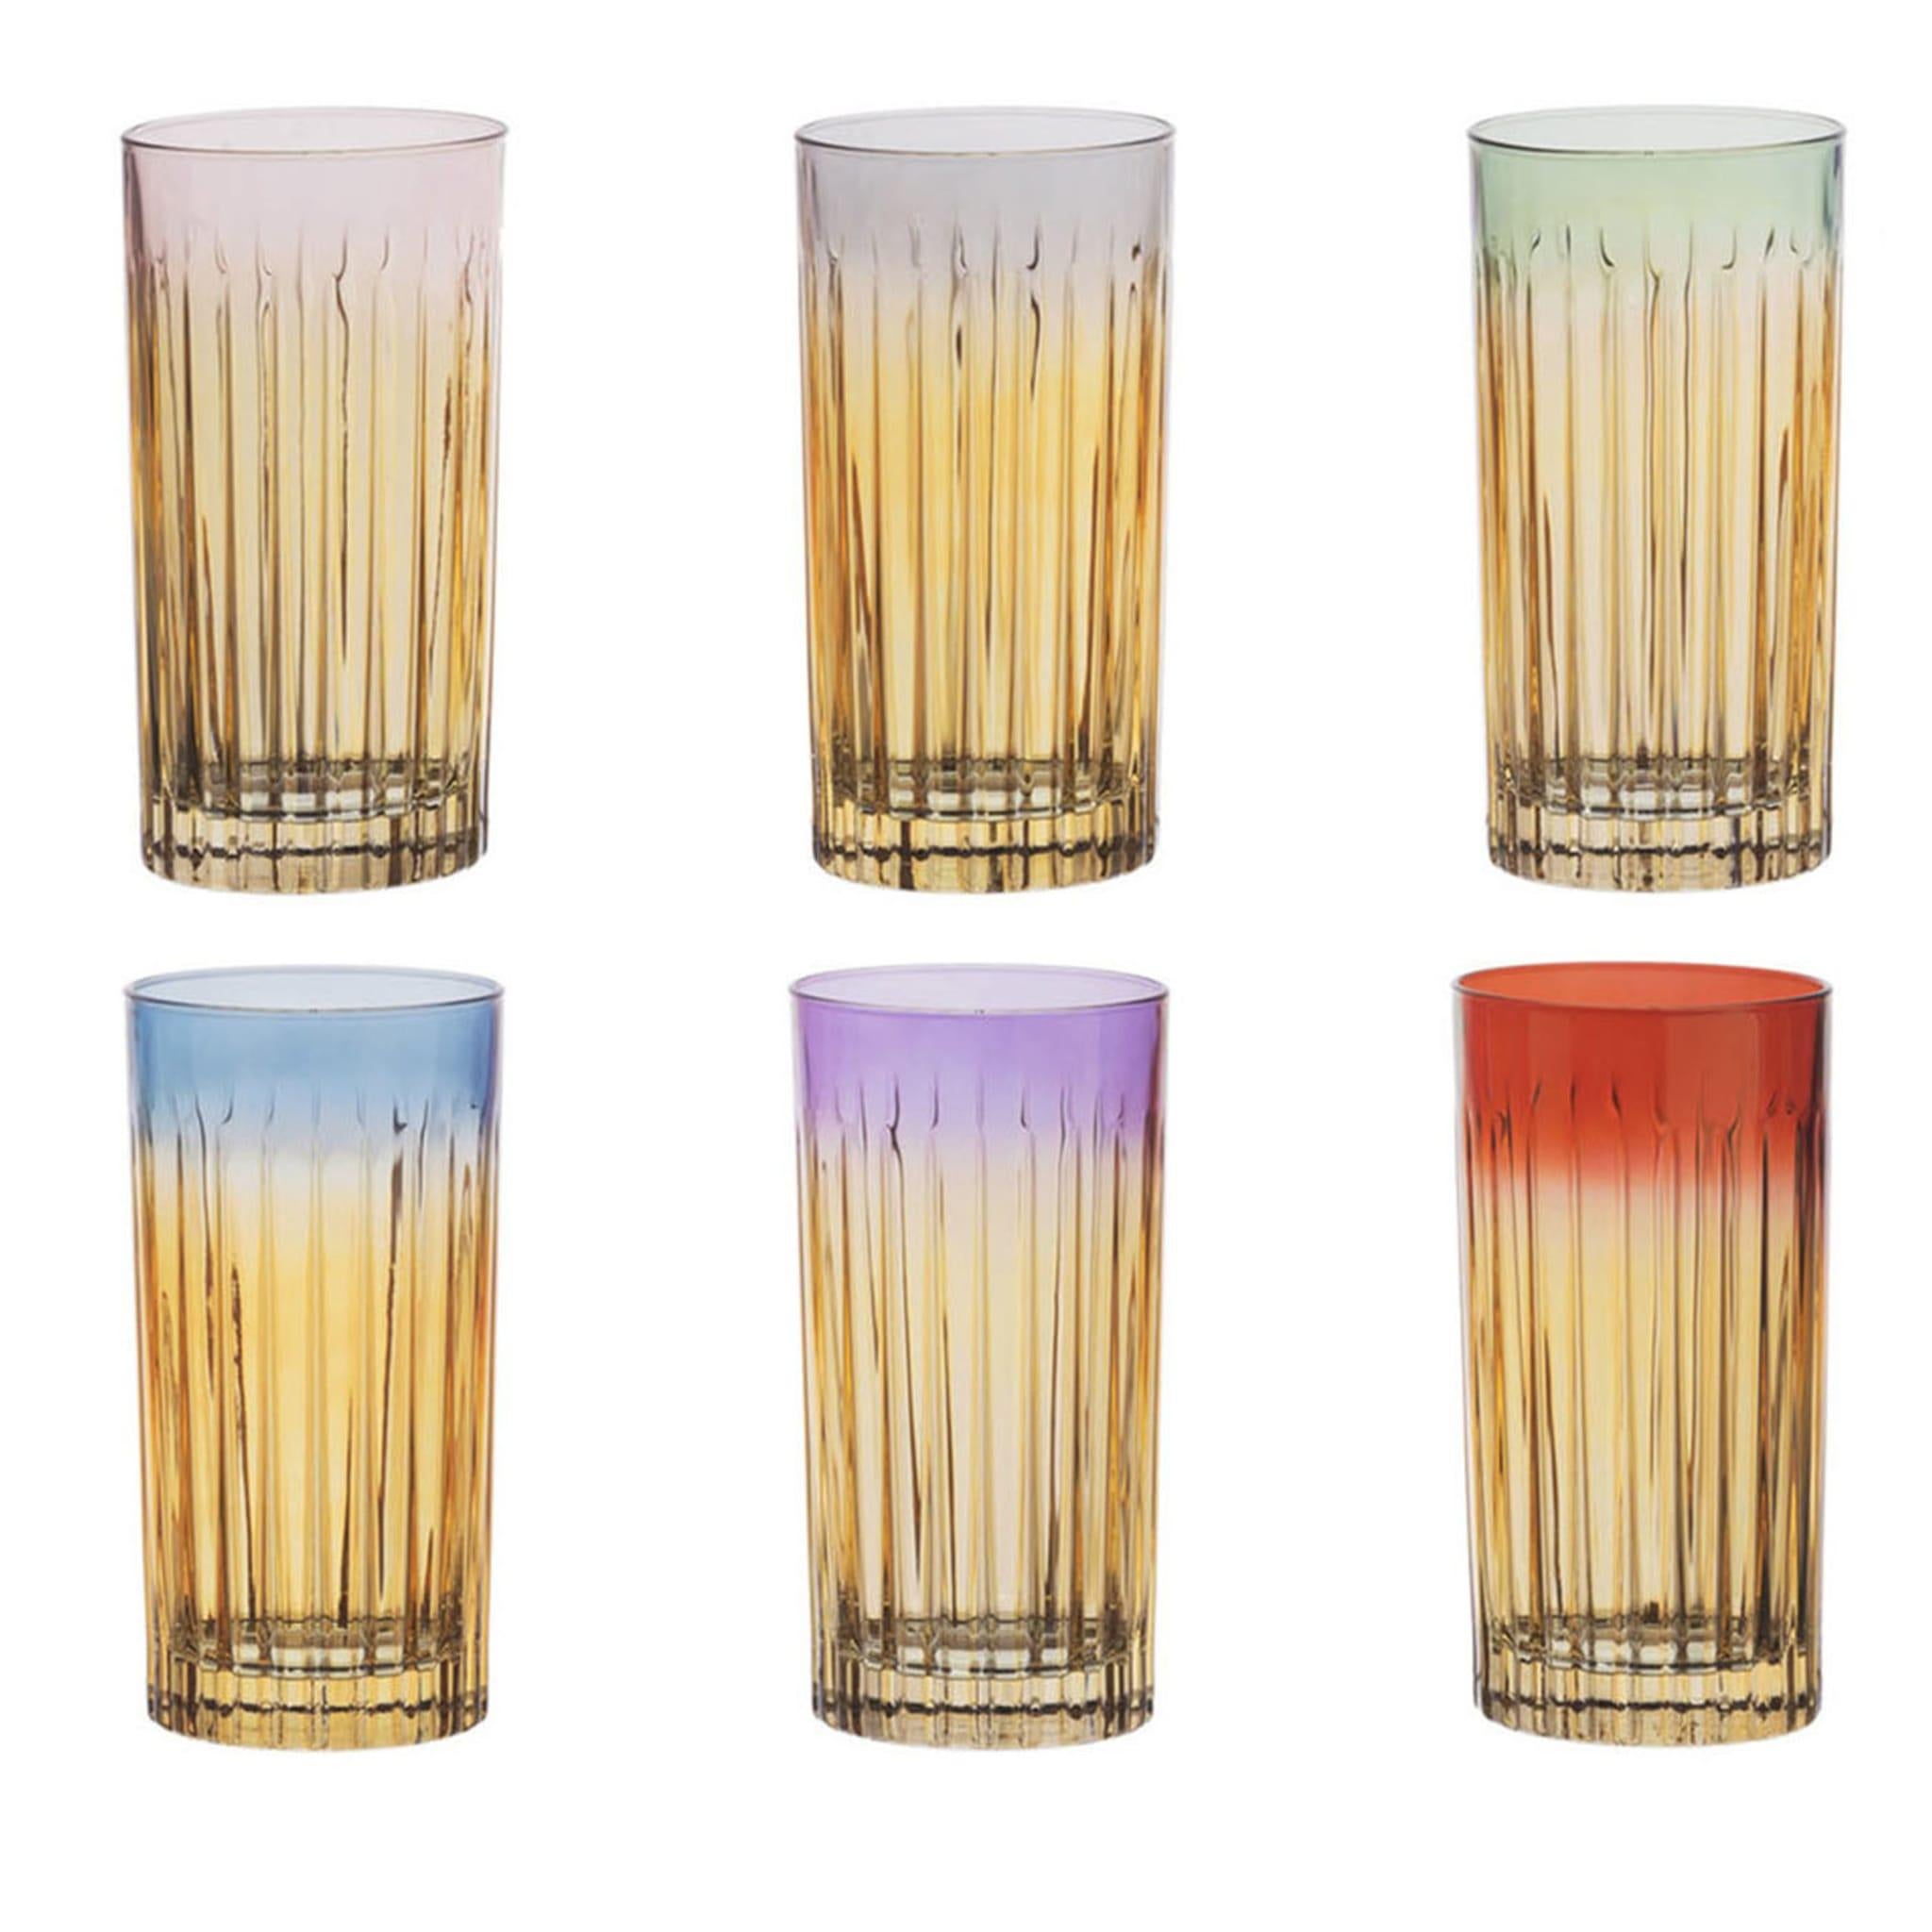 The rim of each of the glasses in this set bares a unique color of its own. Each handmade glass also has an ombre effect transforming the bright rim color into a smoky transparent shade at the bottom.